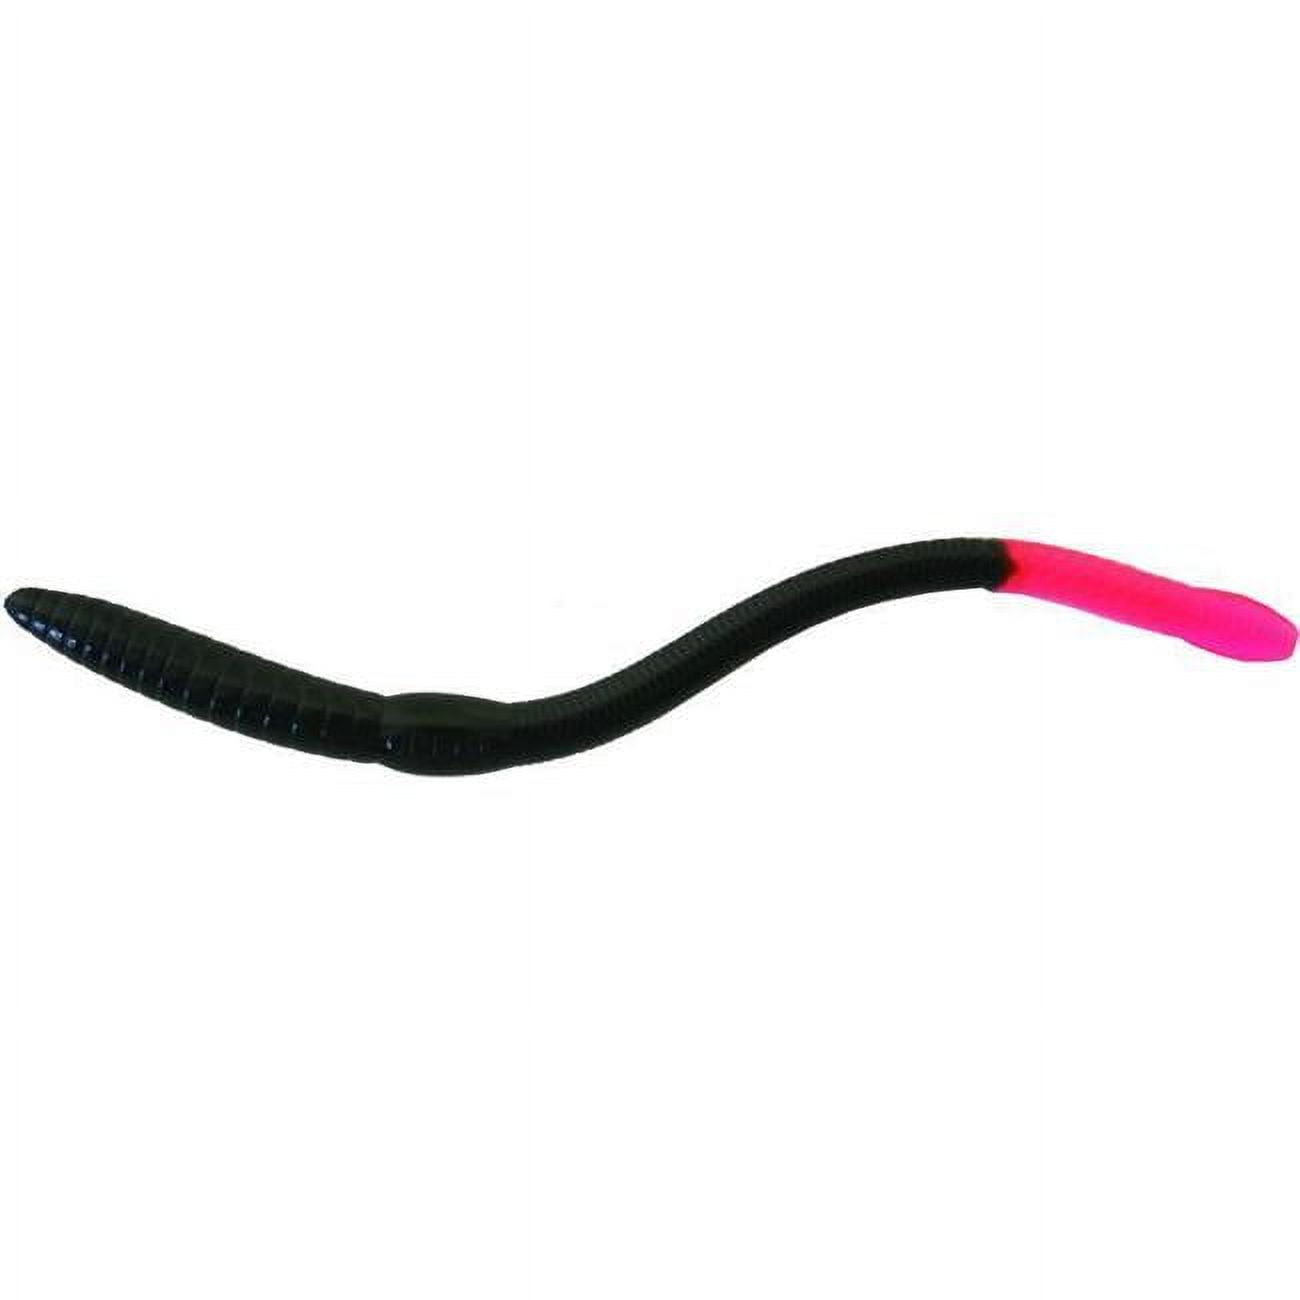  Creme Scoundrel 6-Inch Worm Bait with Wire Leader and  Propeller, WATERMELON : Artificial Fishing Bait : Sports & Outdoors